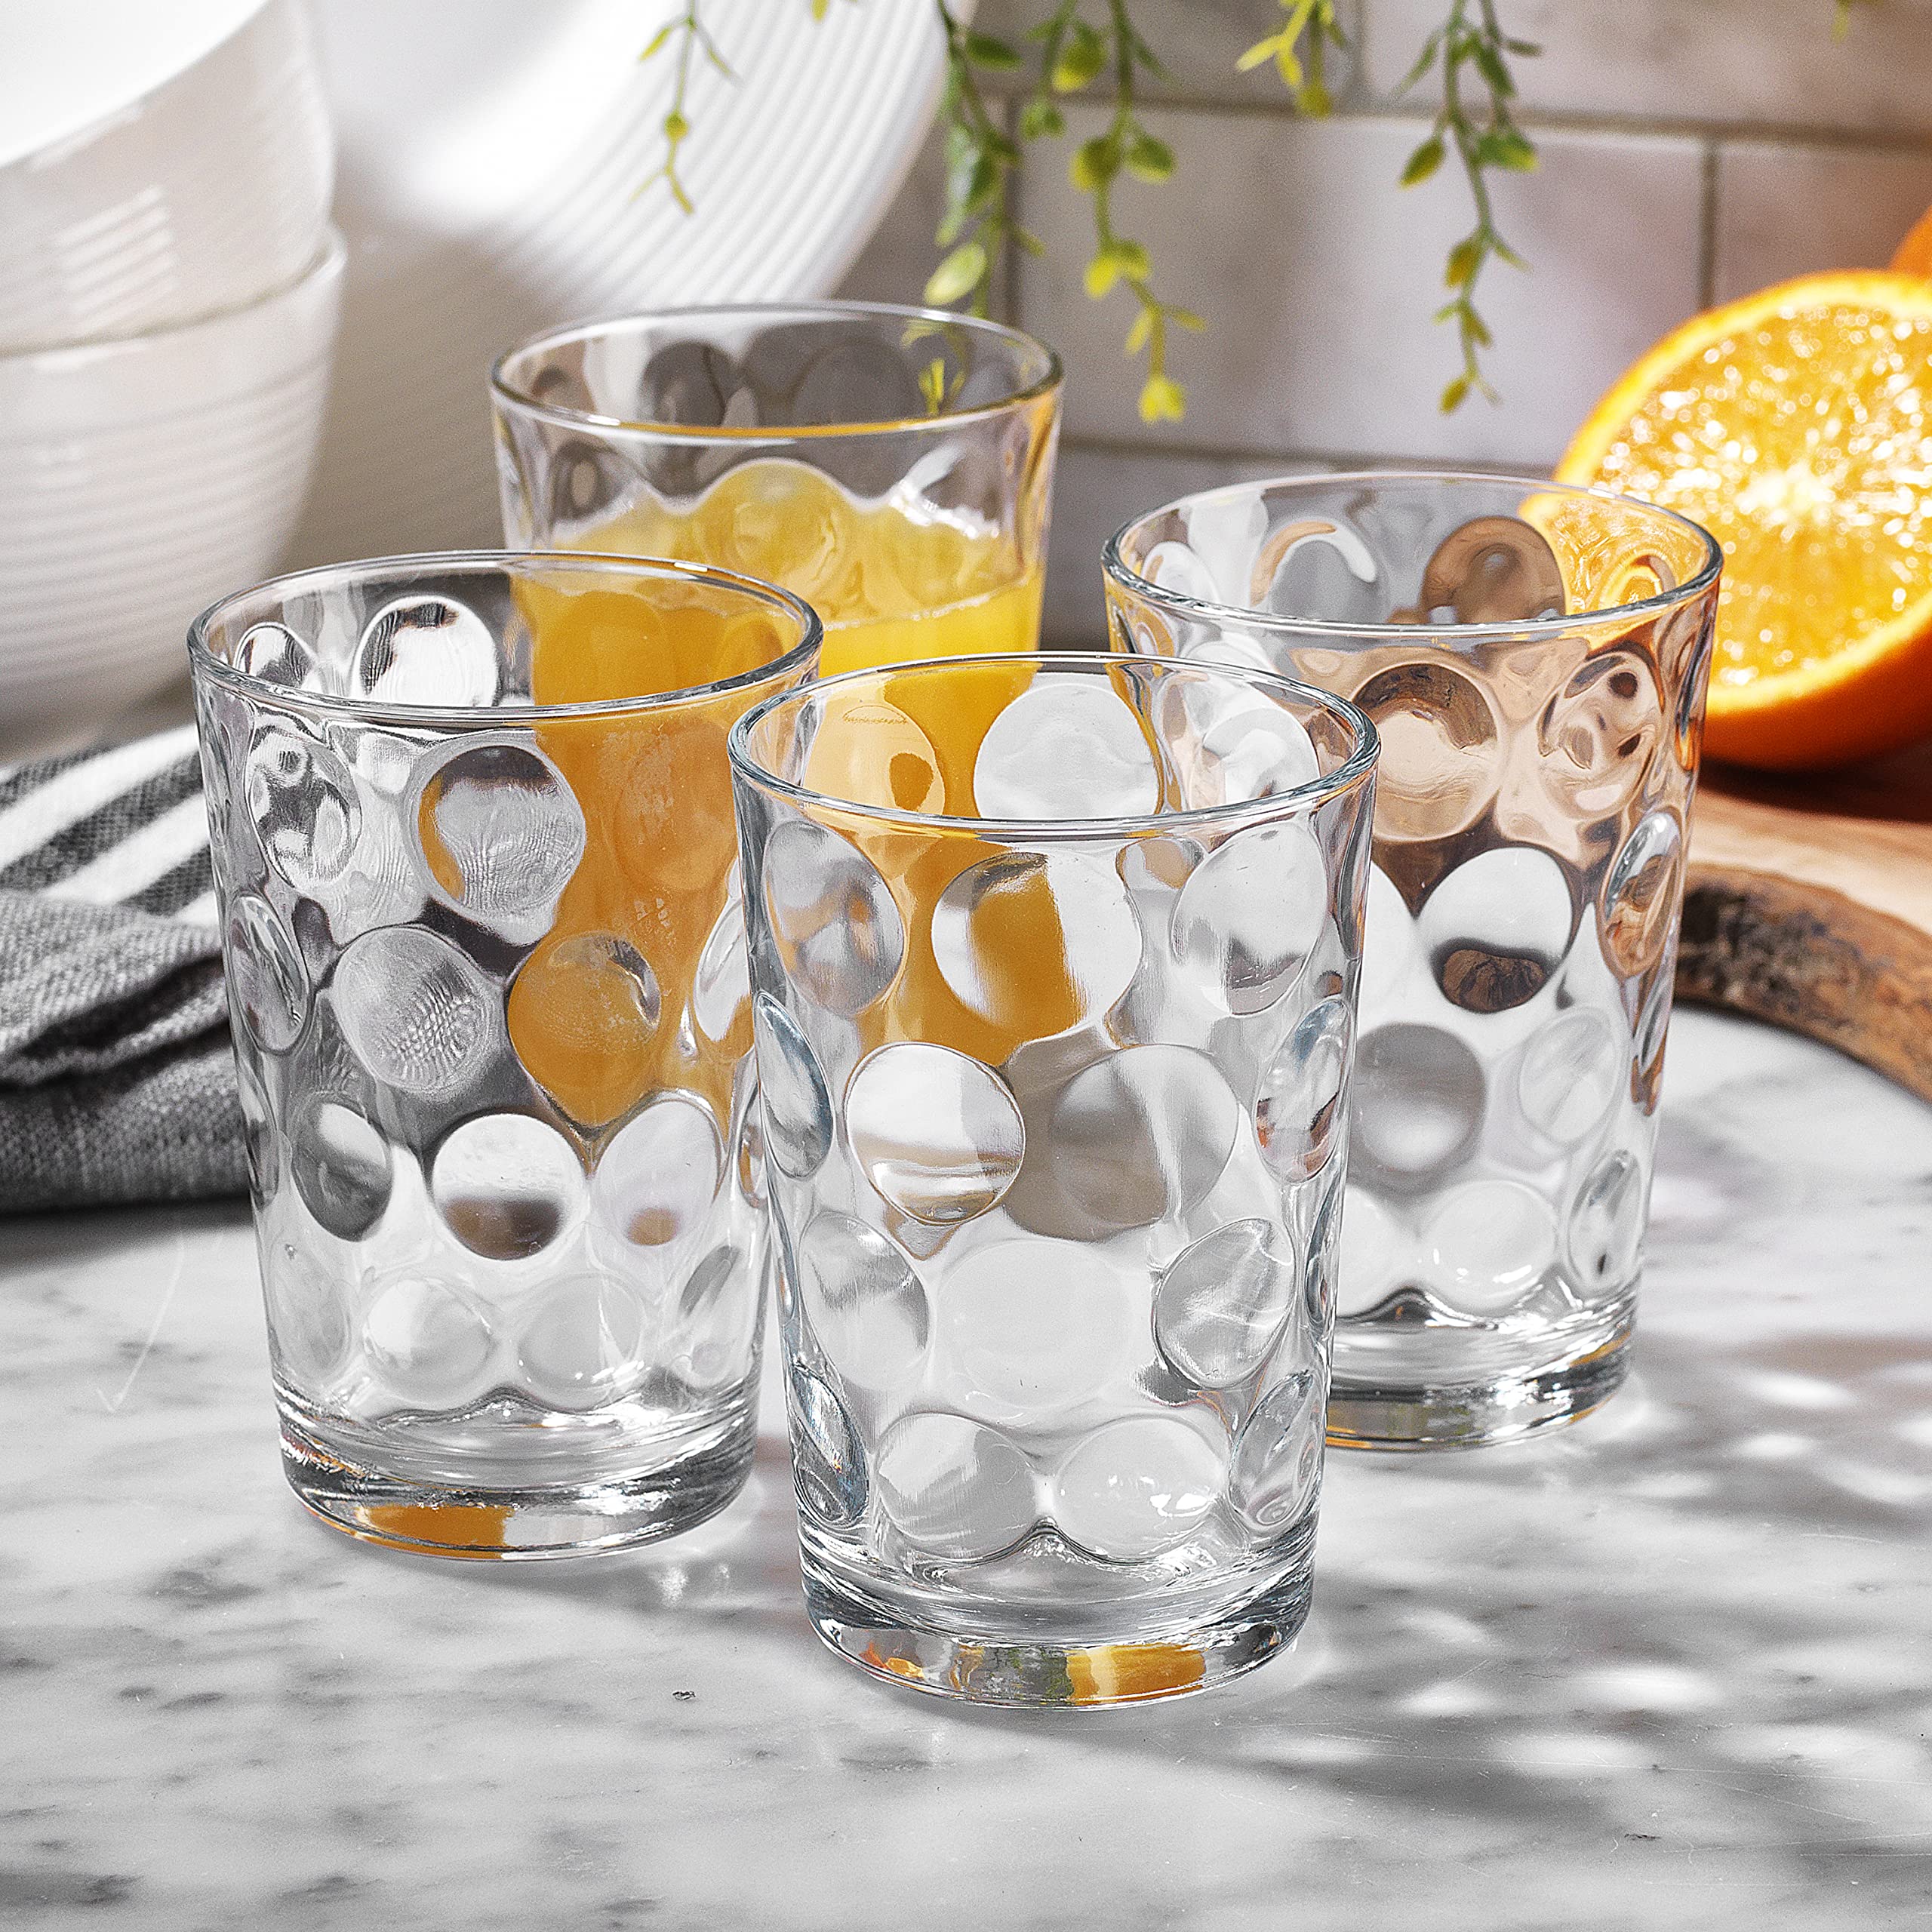 Home Essentials Juice Glasses Water Tumbler Glasses Cups 7 oz Uses for Juice, Water, Cocktails, and more Beverages. Dishwasher safe…  - Acceptable